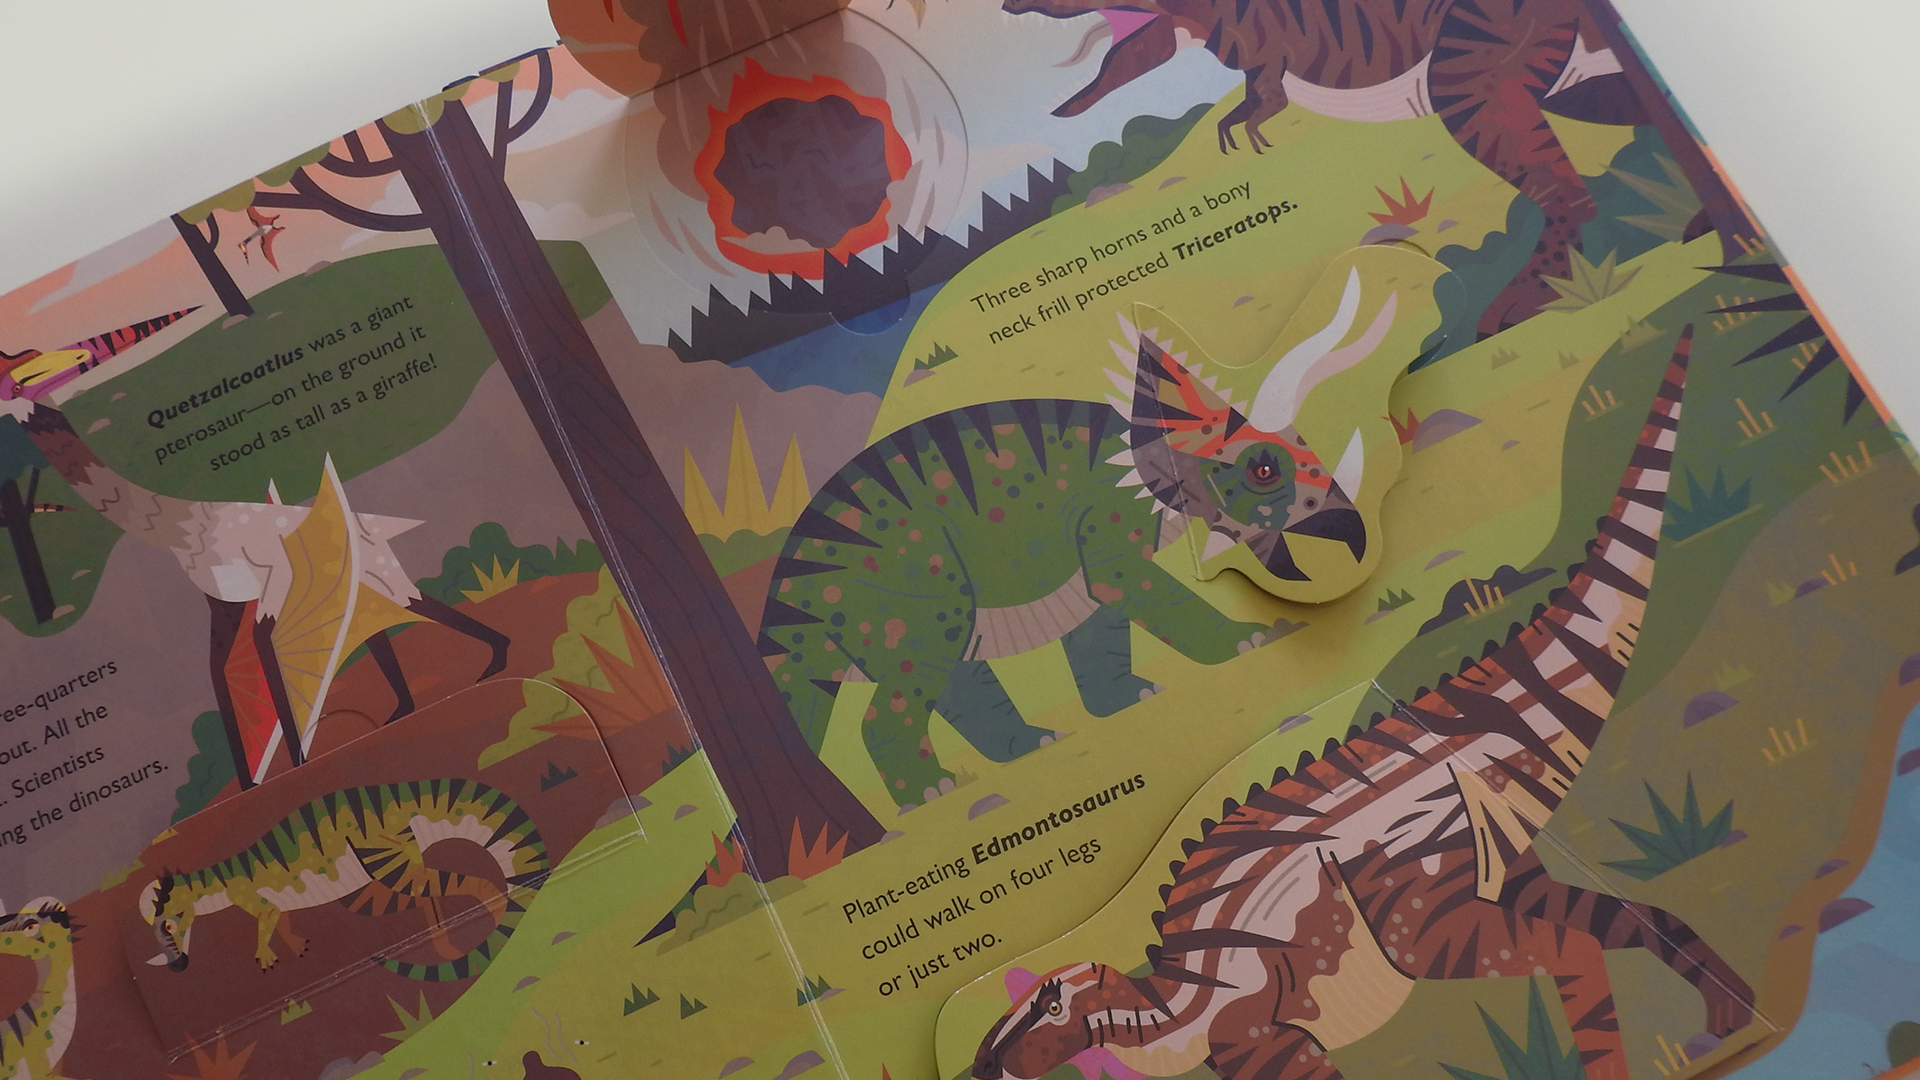 50 dinosaur books for children of all ages - Pan Macmillan